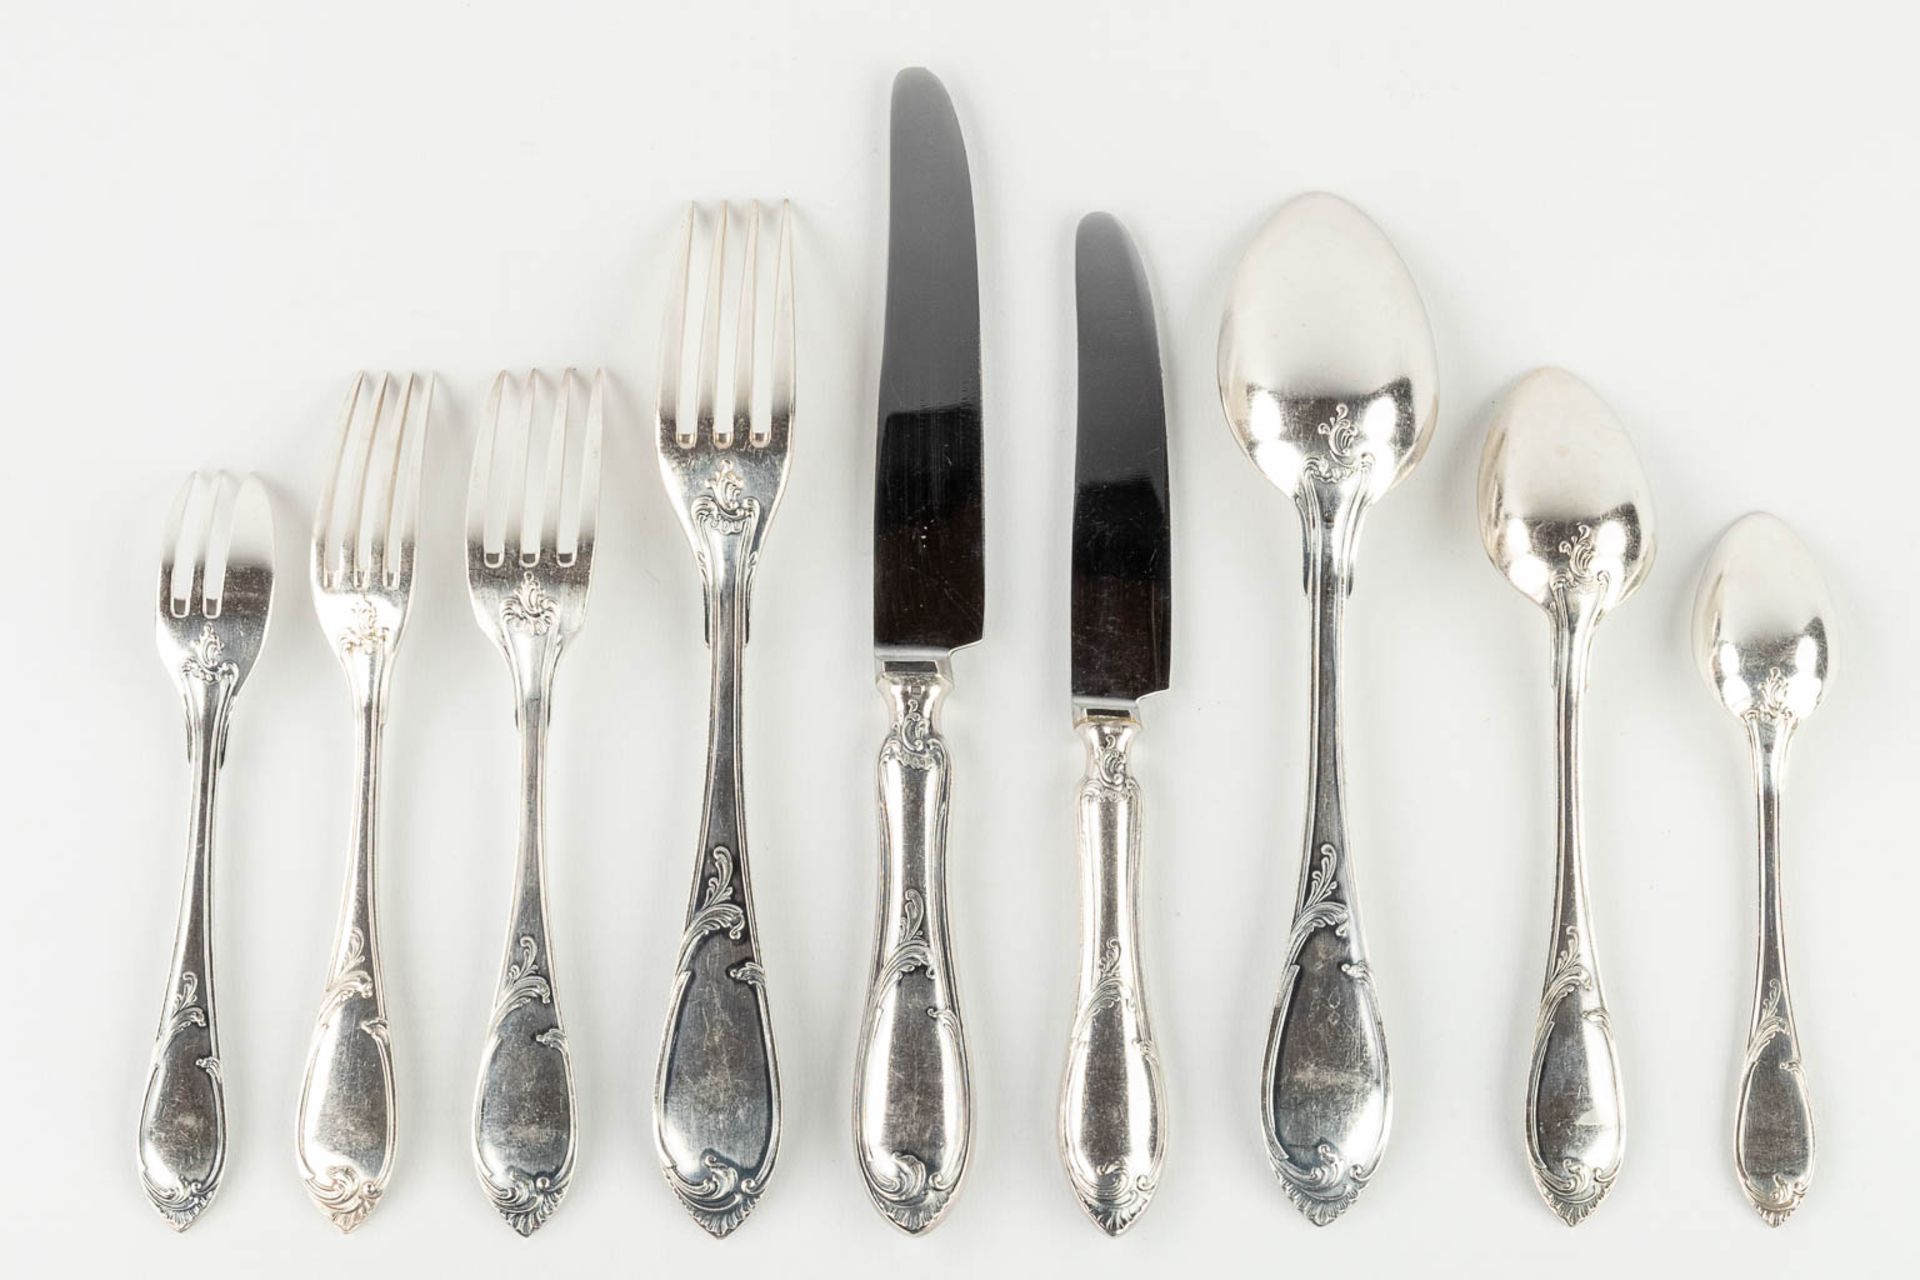 B. Wiskemann, Bruxelles, a silver-plated cutlery set, Louis XV style. (L: 30 x W: 39 x H: 22 cm) - Image 4 of 24